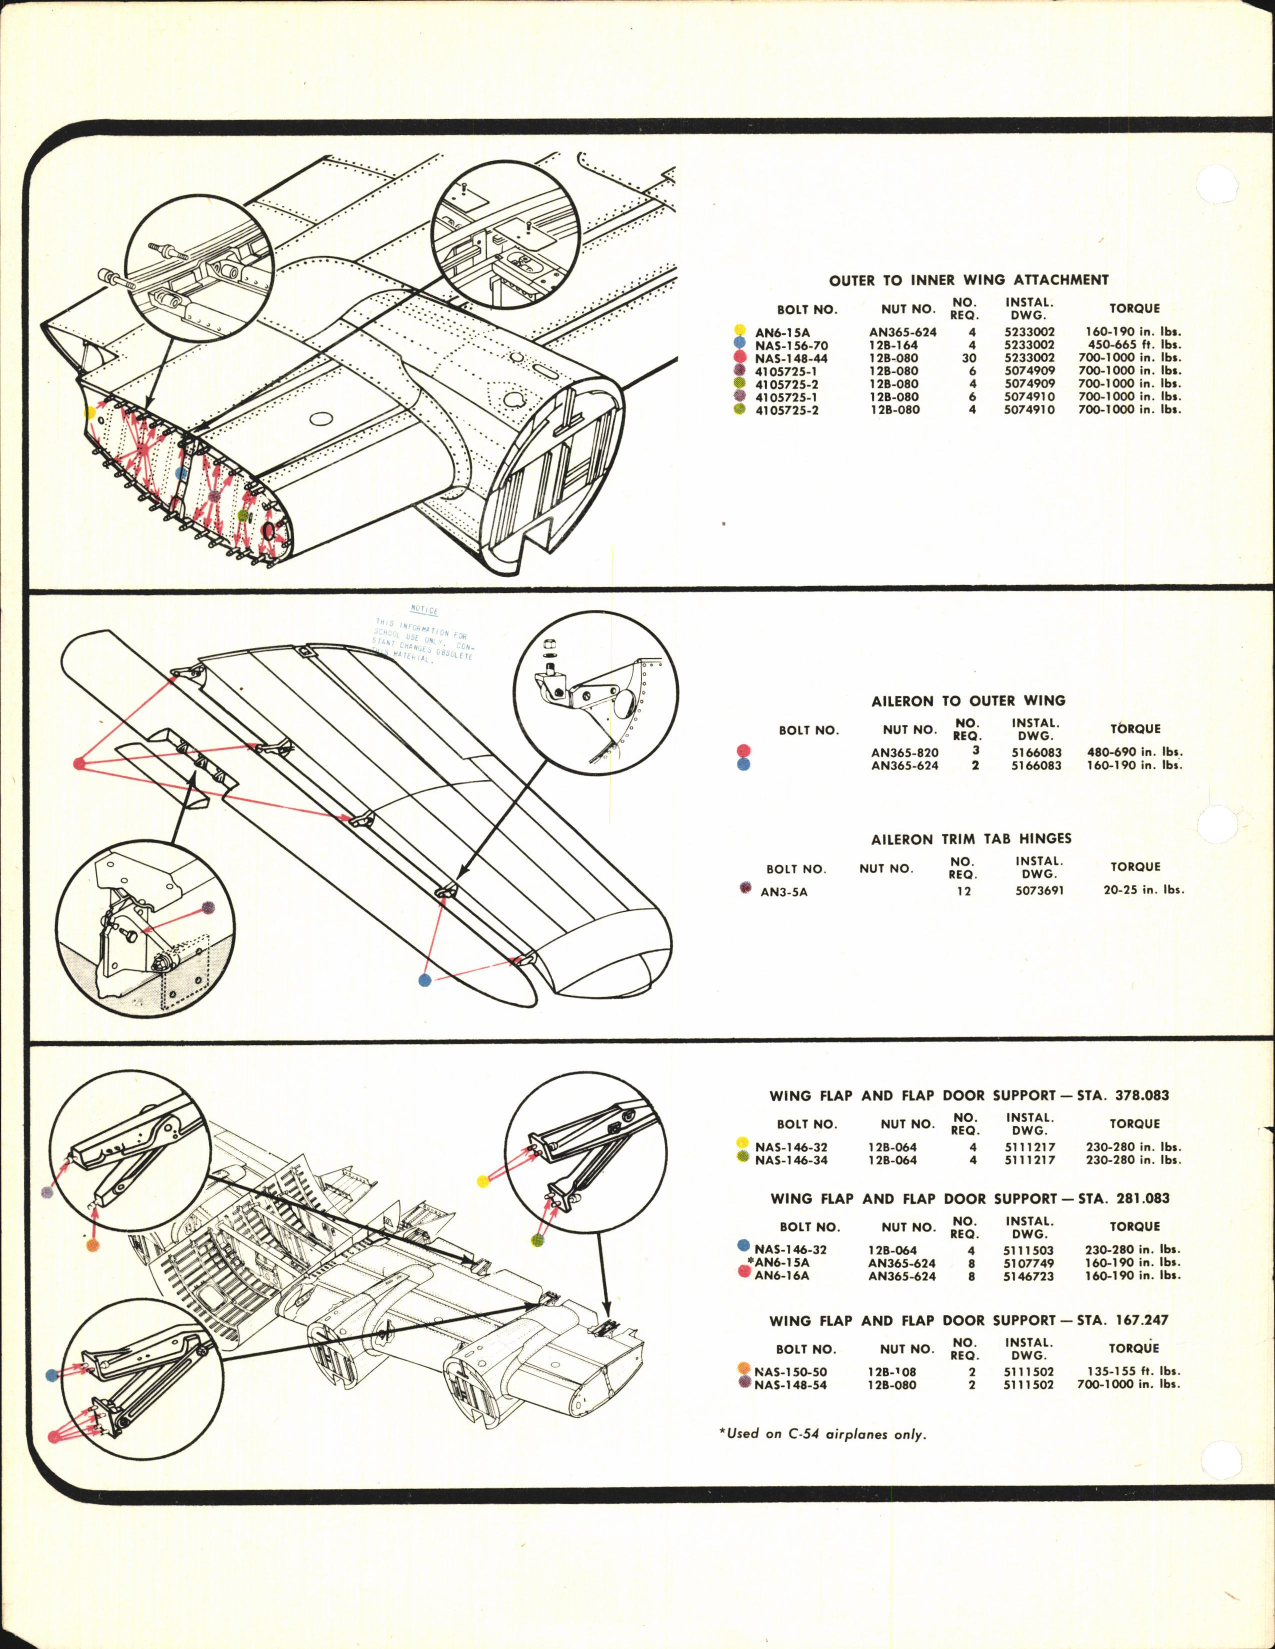 Sample page 6 from AirCorps Library document: C-54, C-54A, and C-54B Torque Values